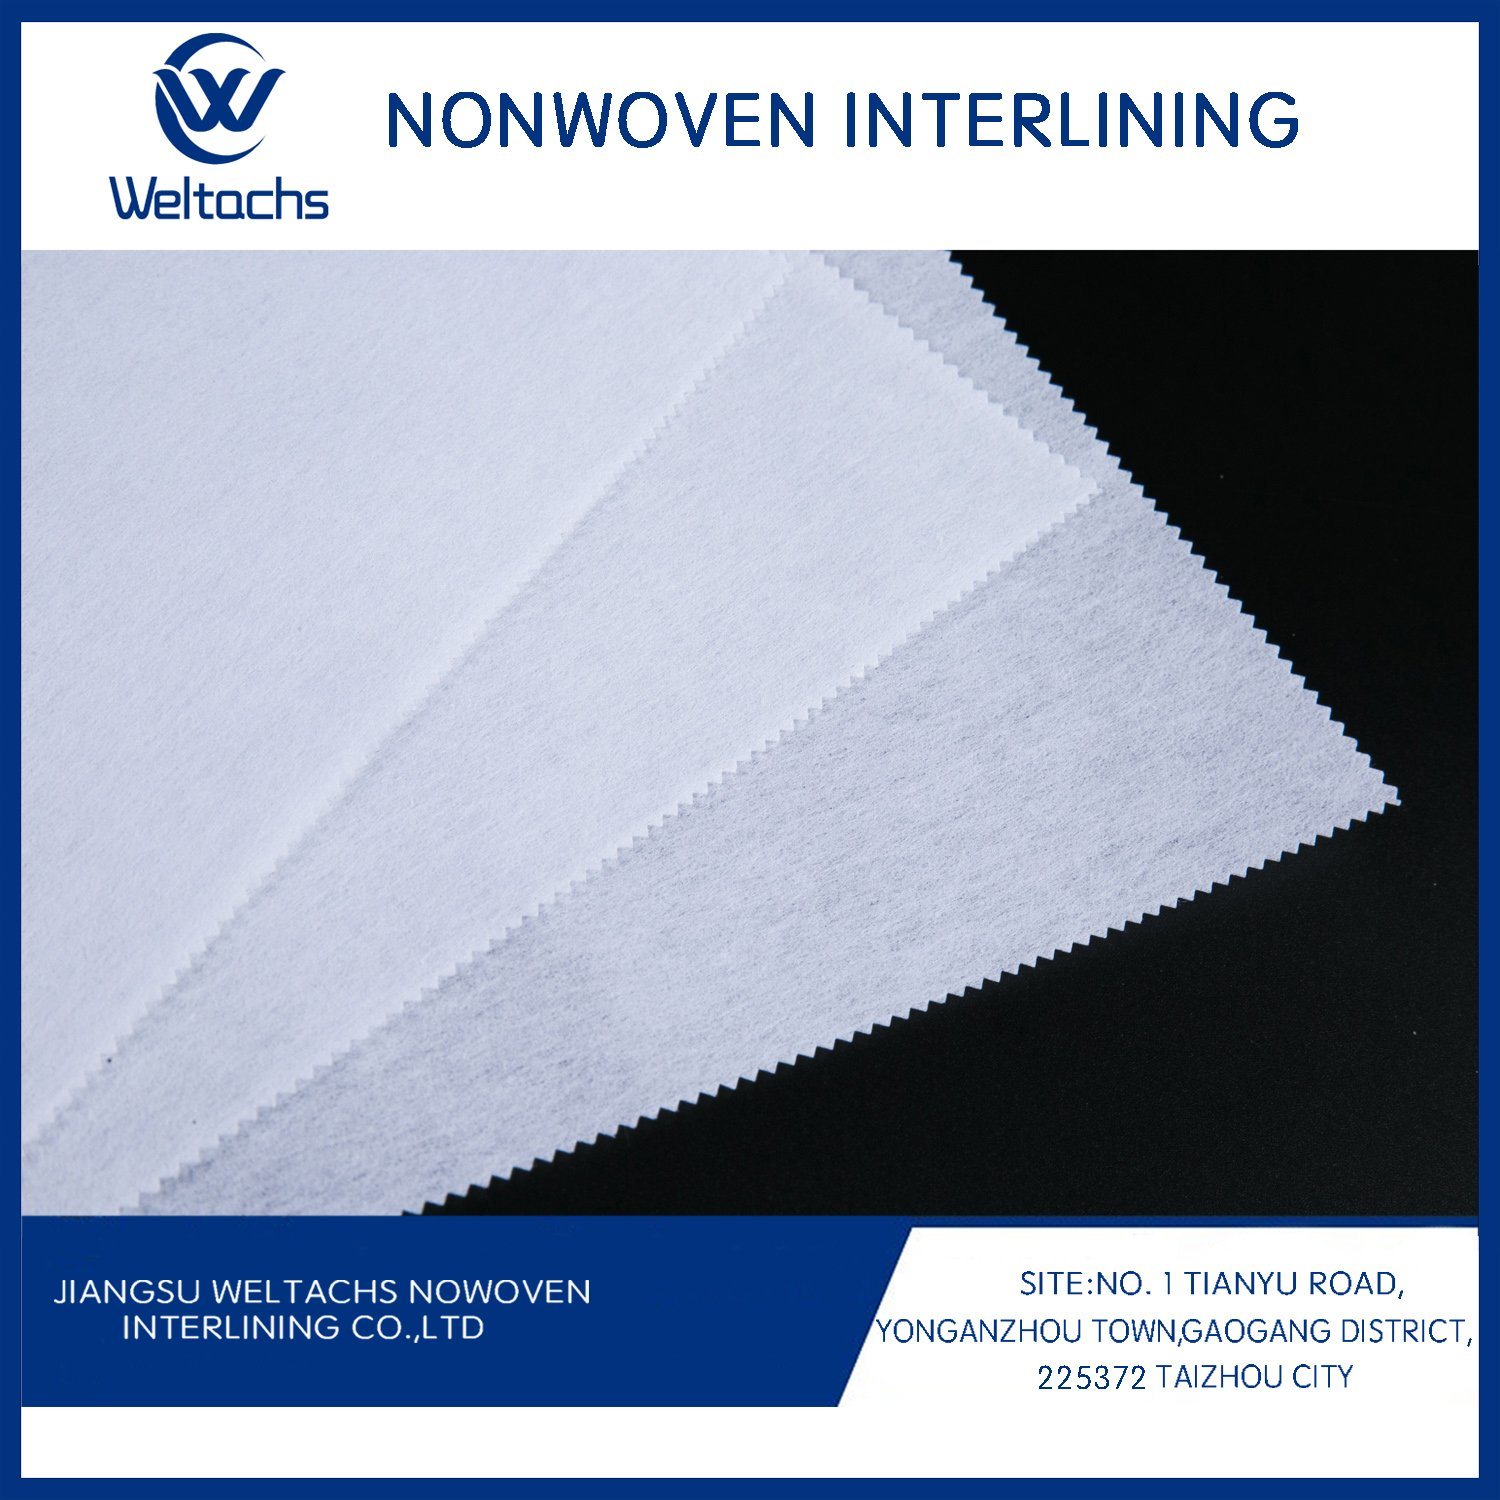 1025hf/1050hf/1080hf LDPE Coating Woven Non-Woven Chemical Bond Interlining for Clothes